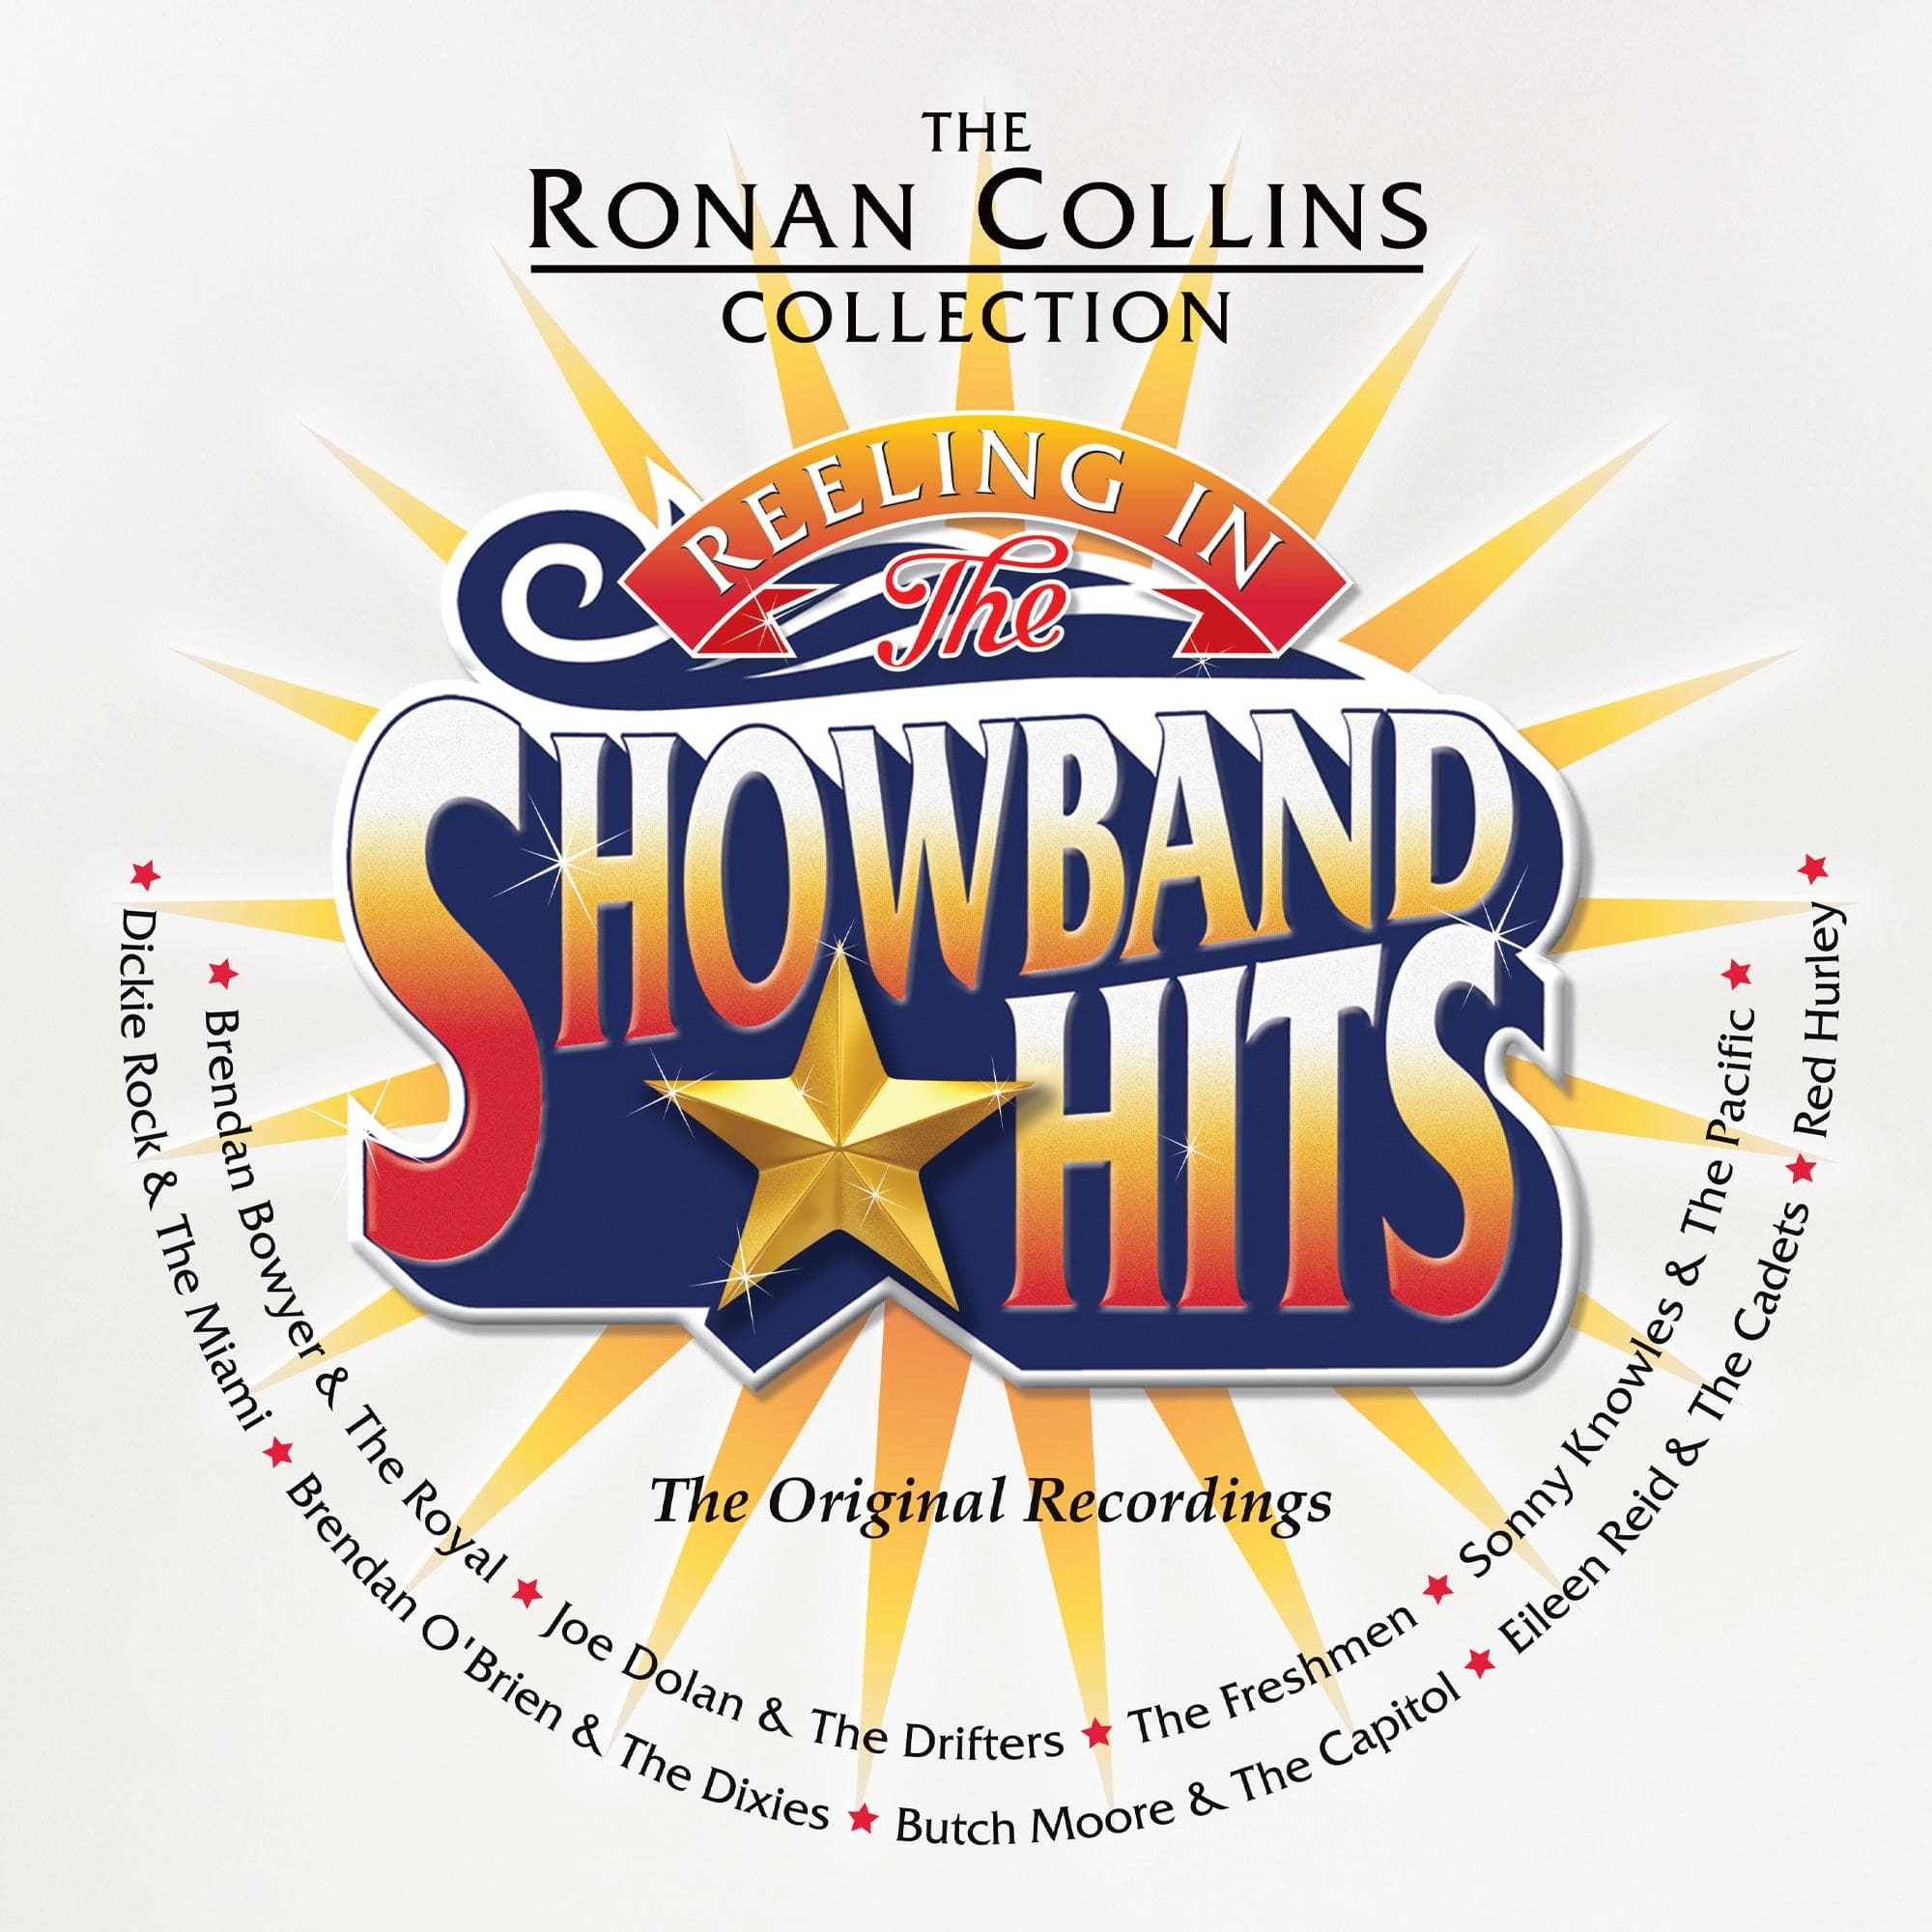 Reeling In The Showband Hits - The Ronan Collins Collection [Vinyl]